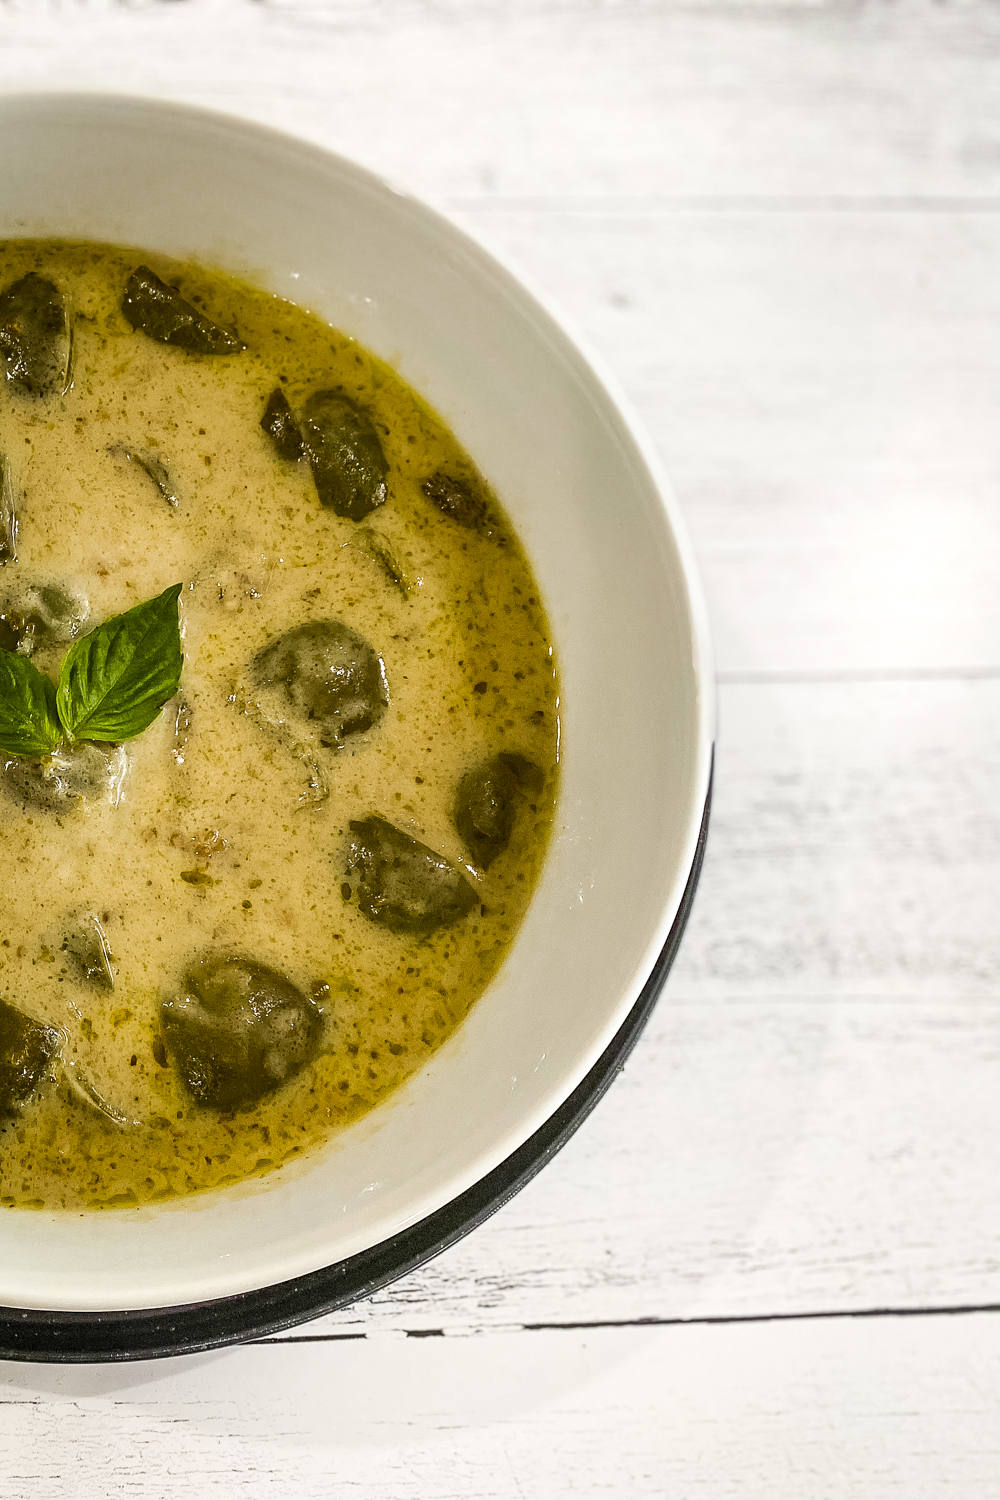 Thai Green Curry with Eggplant and just the right amount of spice along with coconut milk to balance out the flavors.